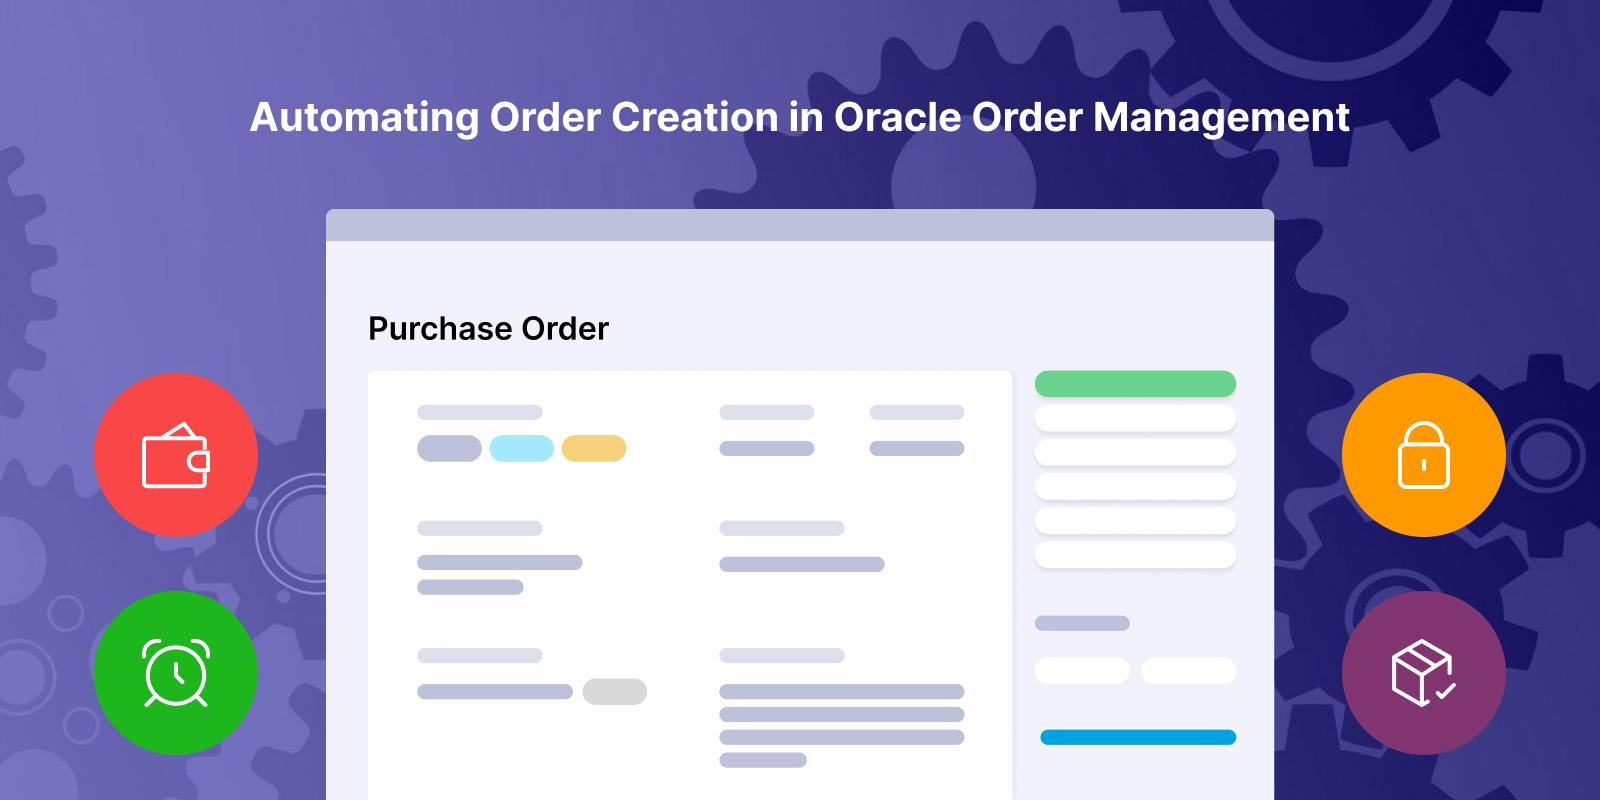 Automating Order Creation in Oracle Order Management